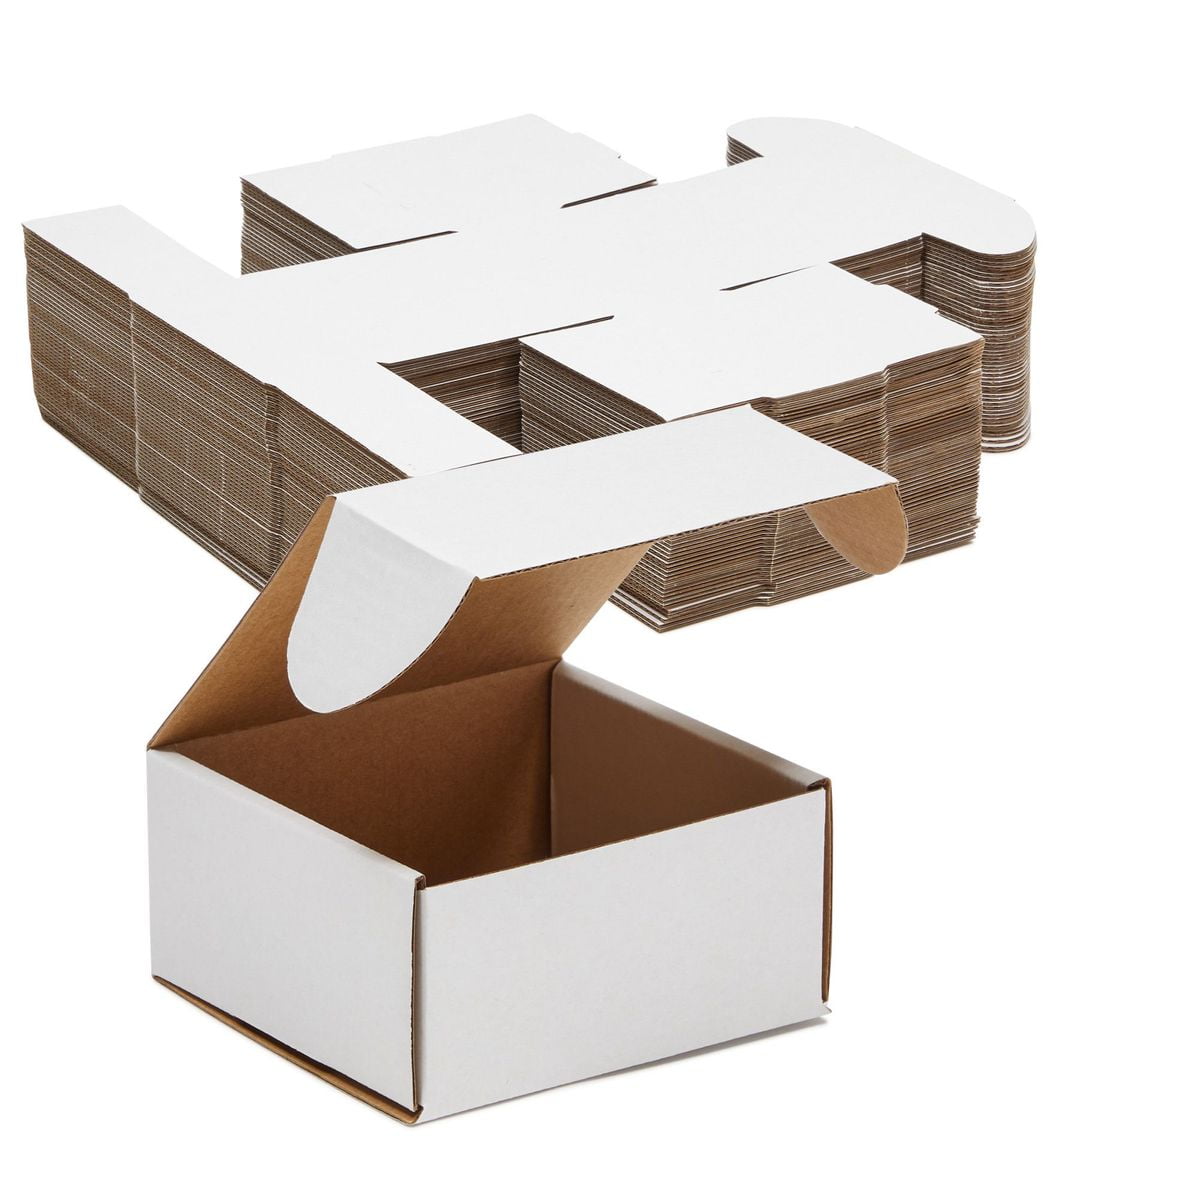 Perfect Stix Shipping Boxes Mailers 8x6x4 inches Cardboard Small Packing Kraft Moving Mailing Box Pack of 10 Sturdy Cardboard 